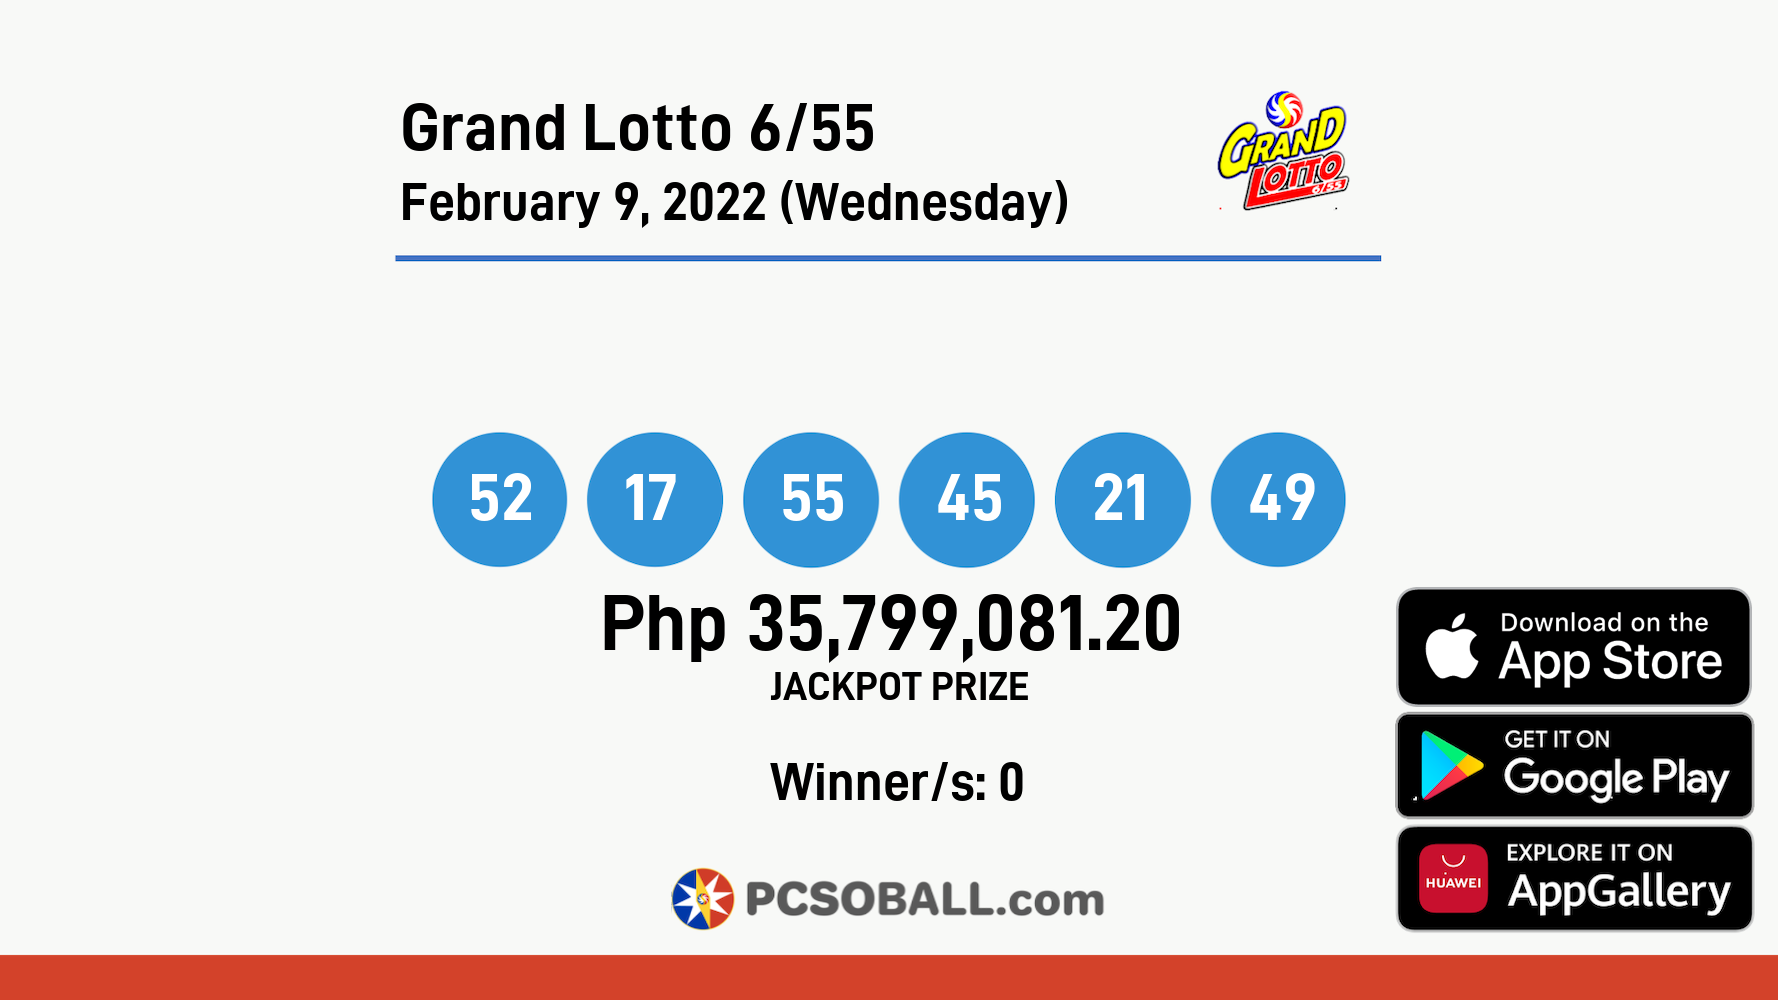 Grand Lotto 6/55 February 9, 2022 (Wednesday) Result